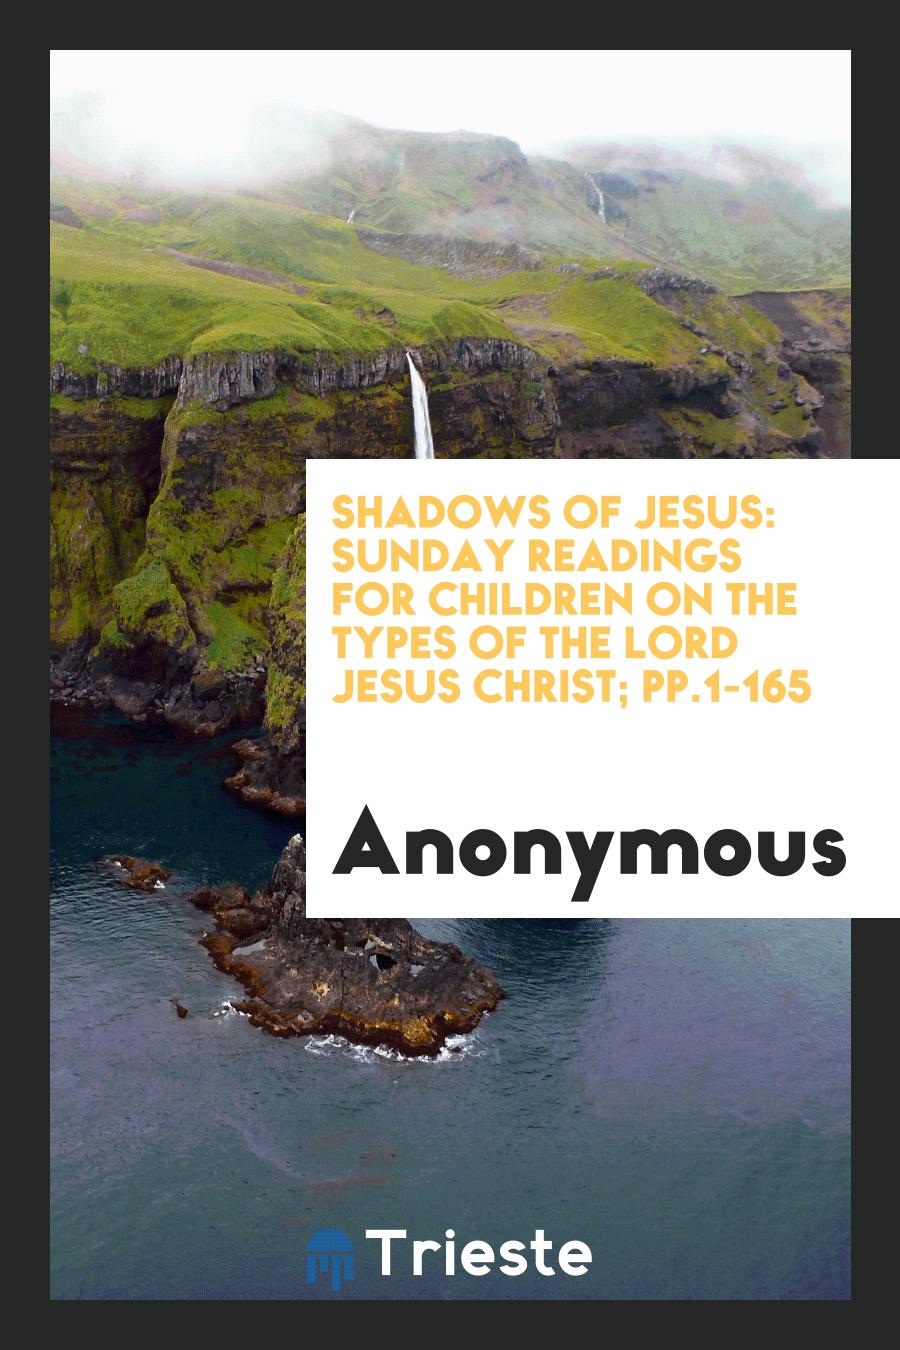 Shadows of Jesus: Sunday Readings for Children on the Types of the Lord Jesus Christ; pp.1-165